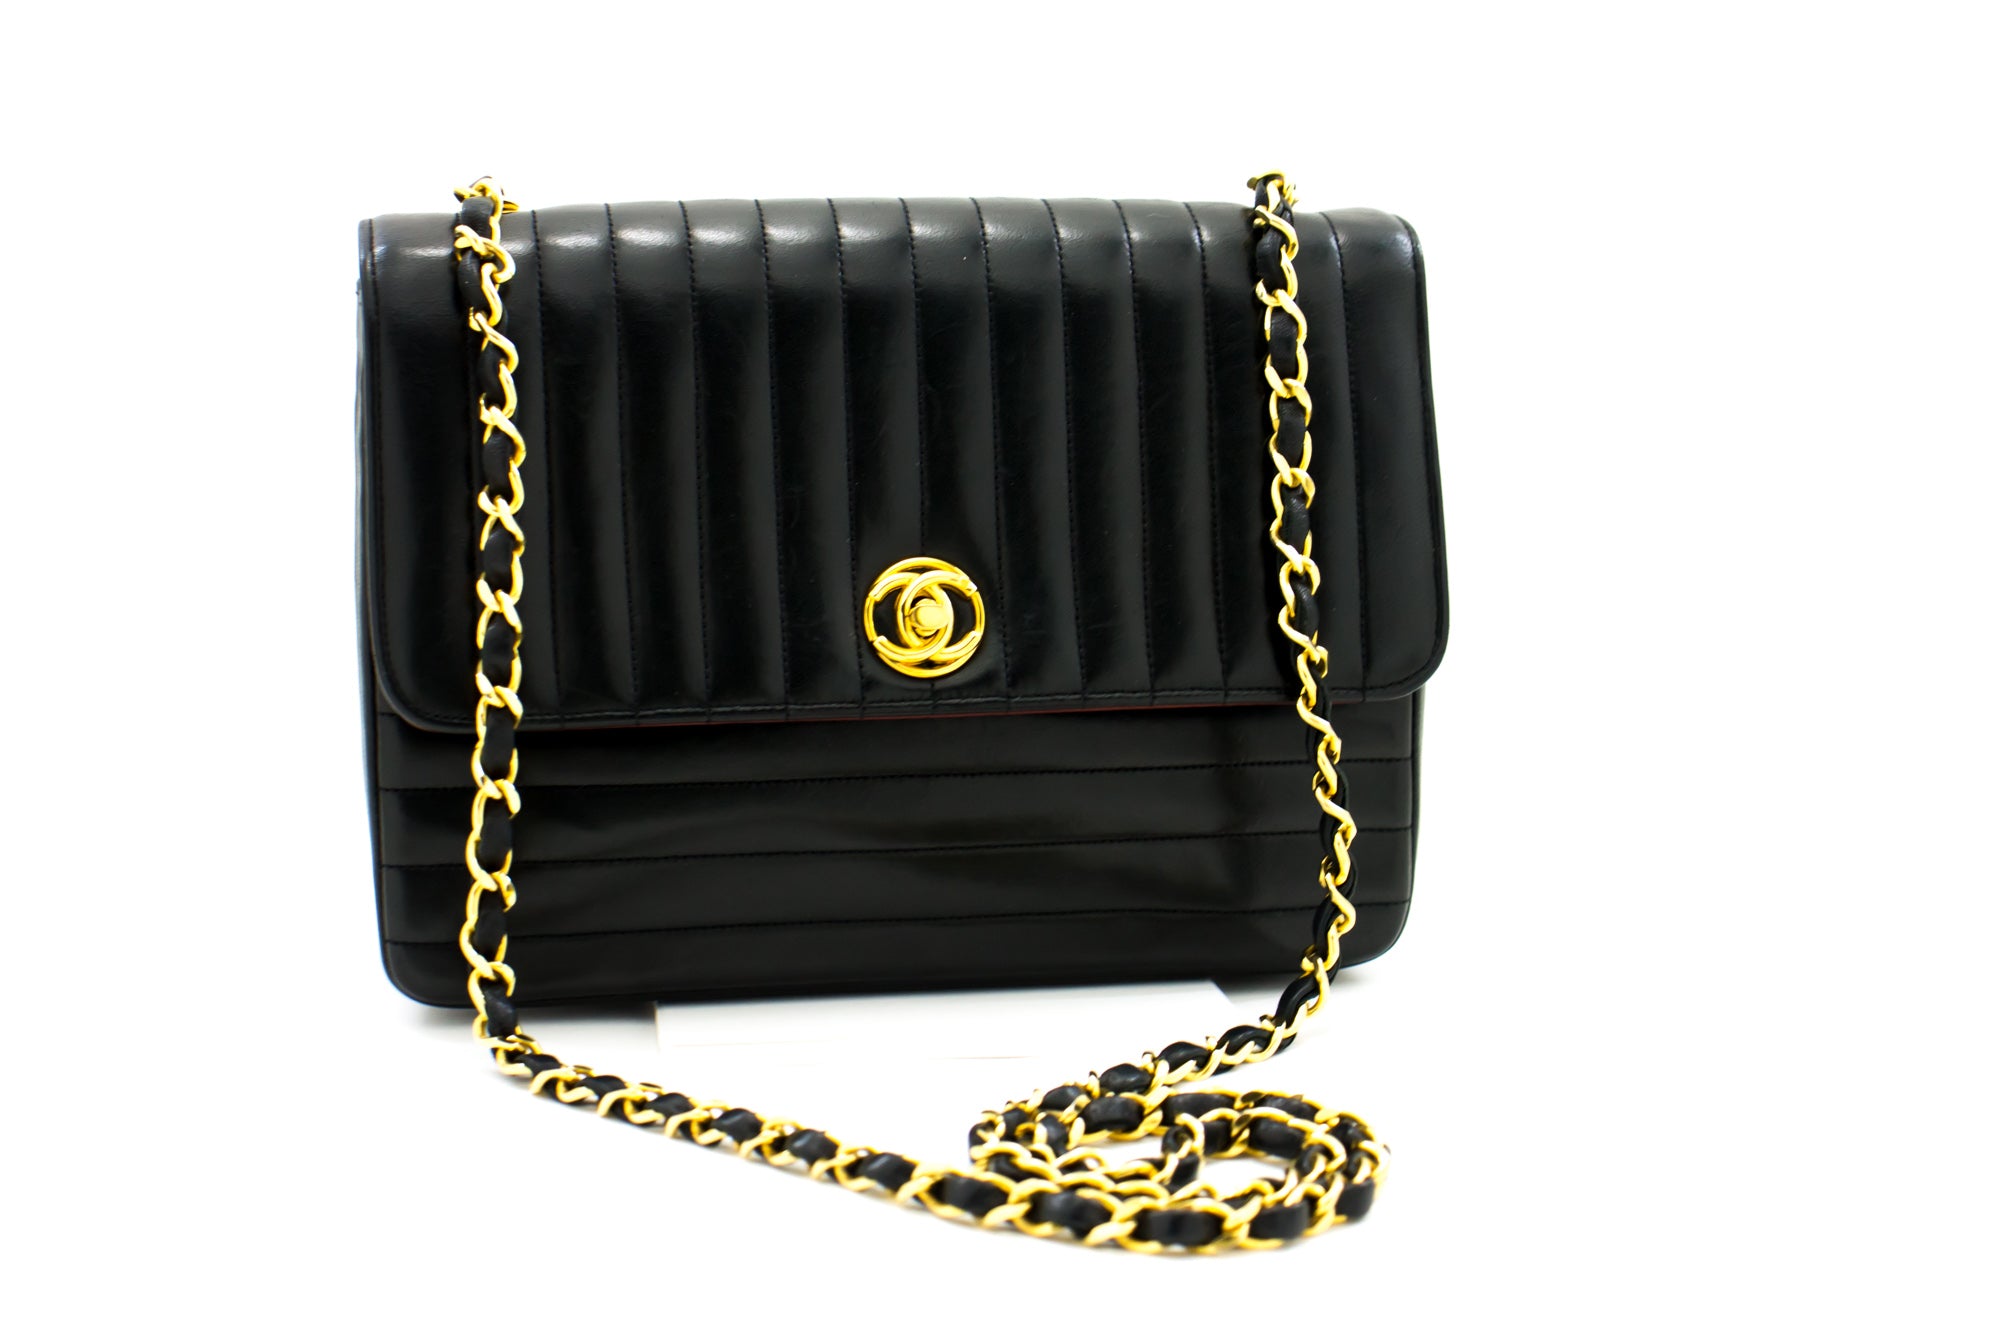 CHANEL Vintage Small Chain Shoulder Bag Crossbody Black Quilted